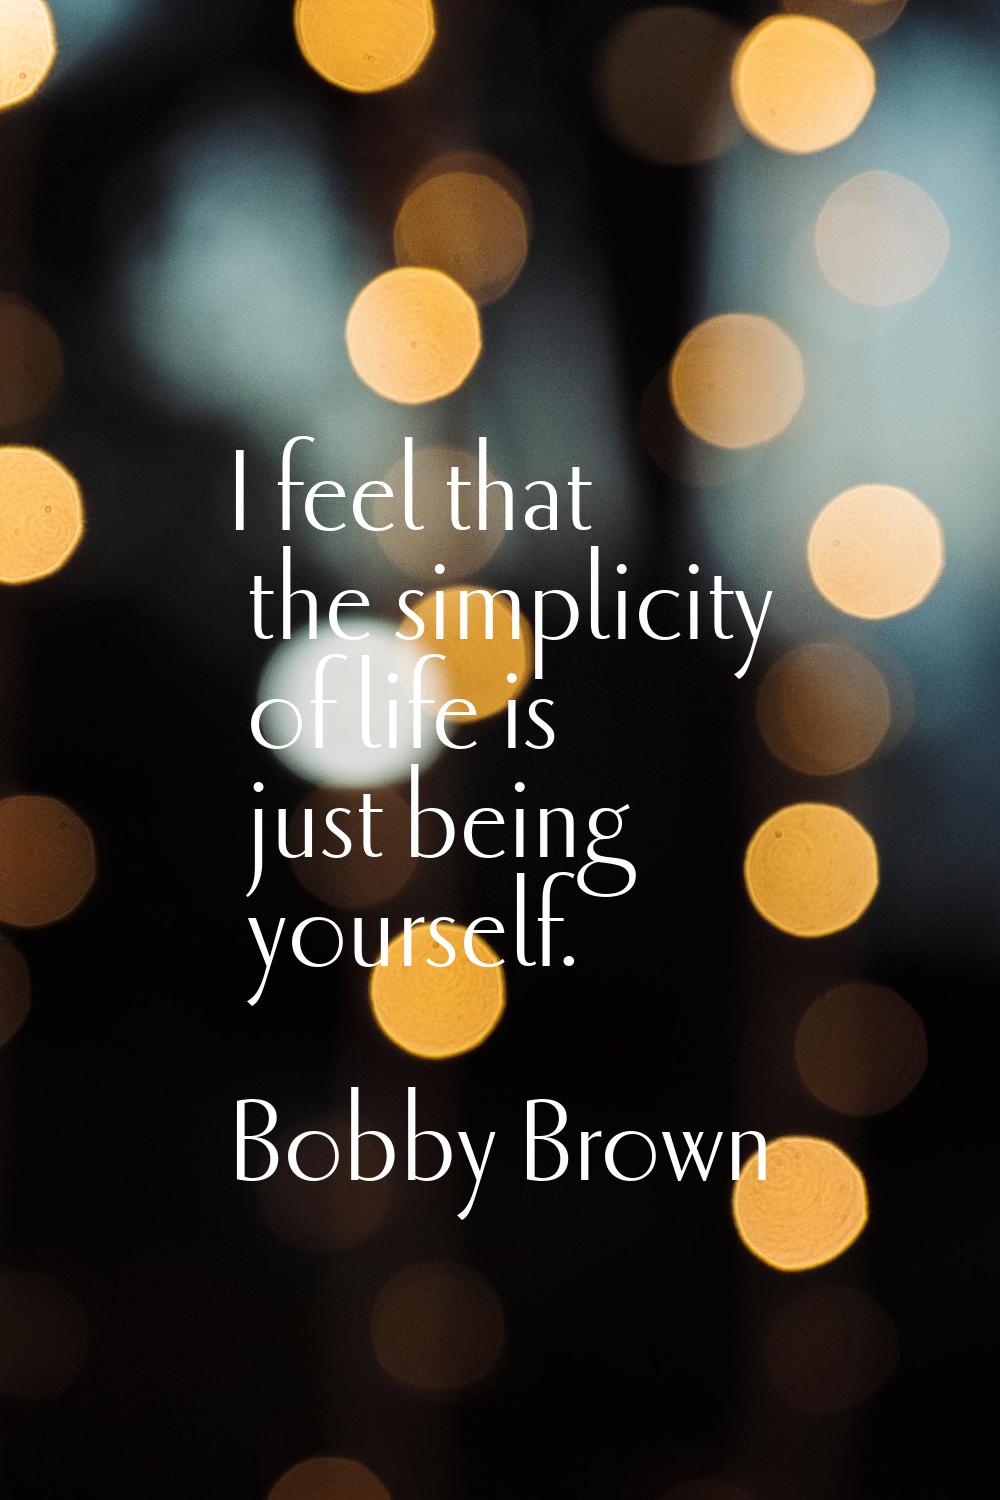 I feel that the simplicity of life is just being yourself.